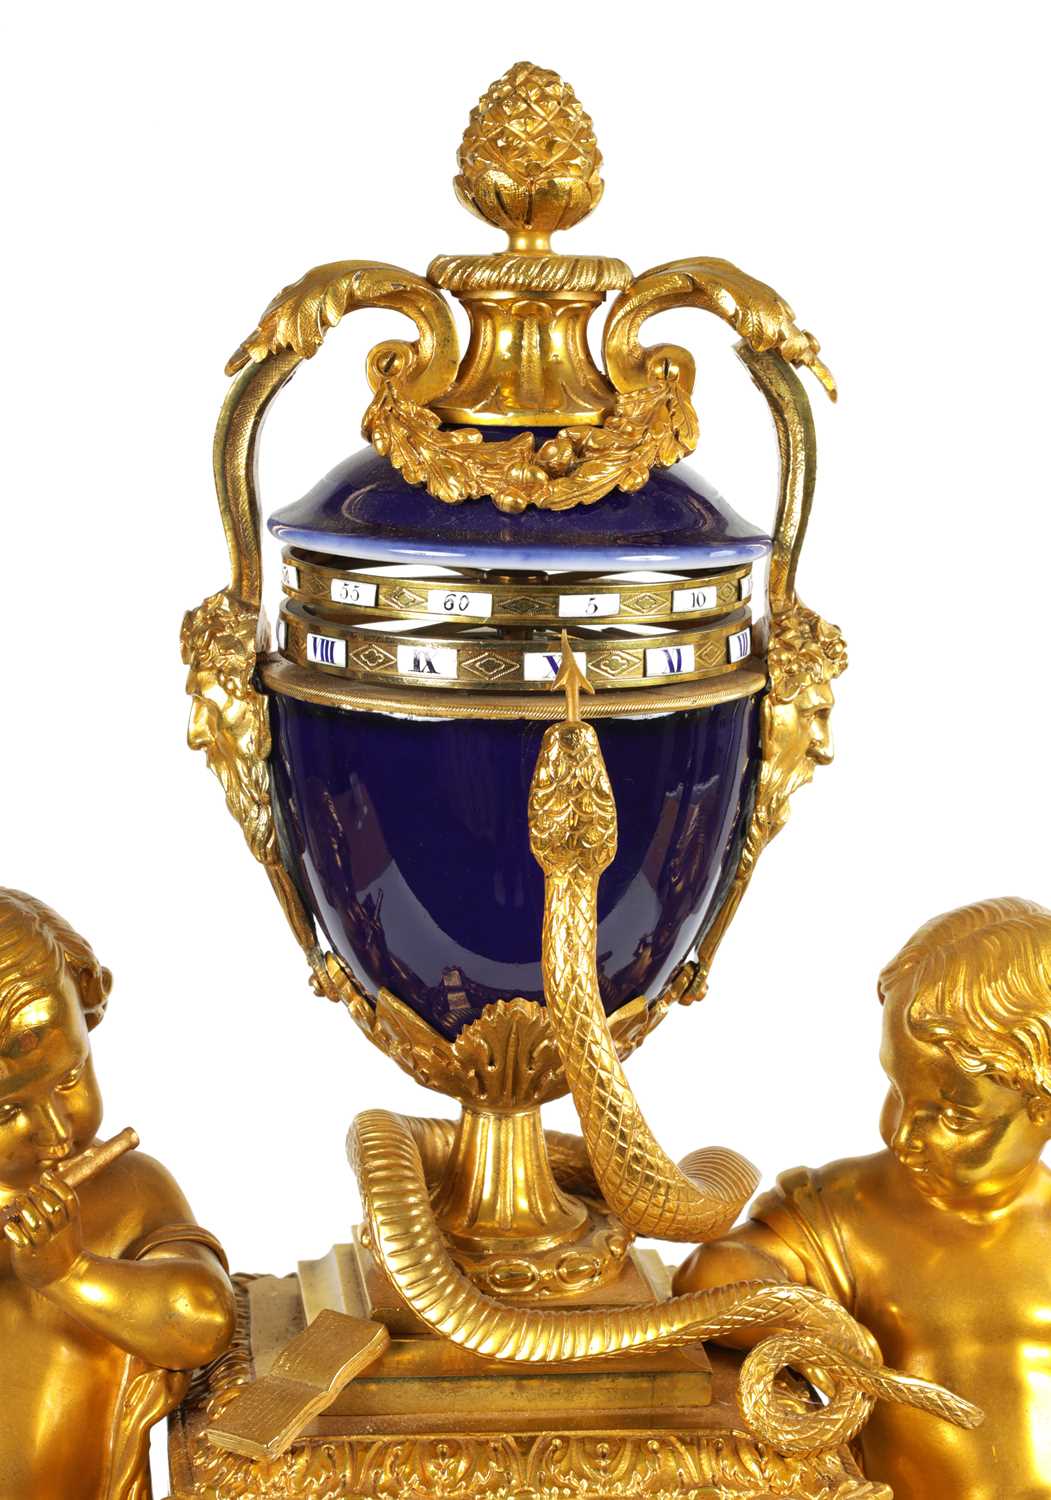 A FINE MID 19TH FRENCH ORMOLU AND 'SEVRES' PORCELAIN MOUNTED REVOLVING URN CLOCK - Image 2 of 13